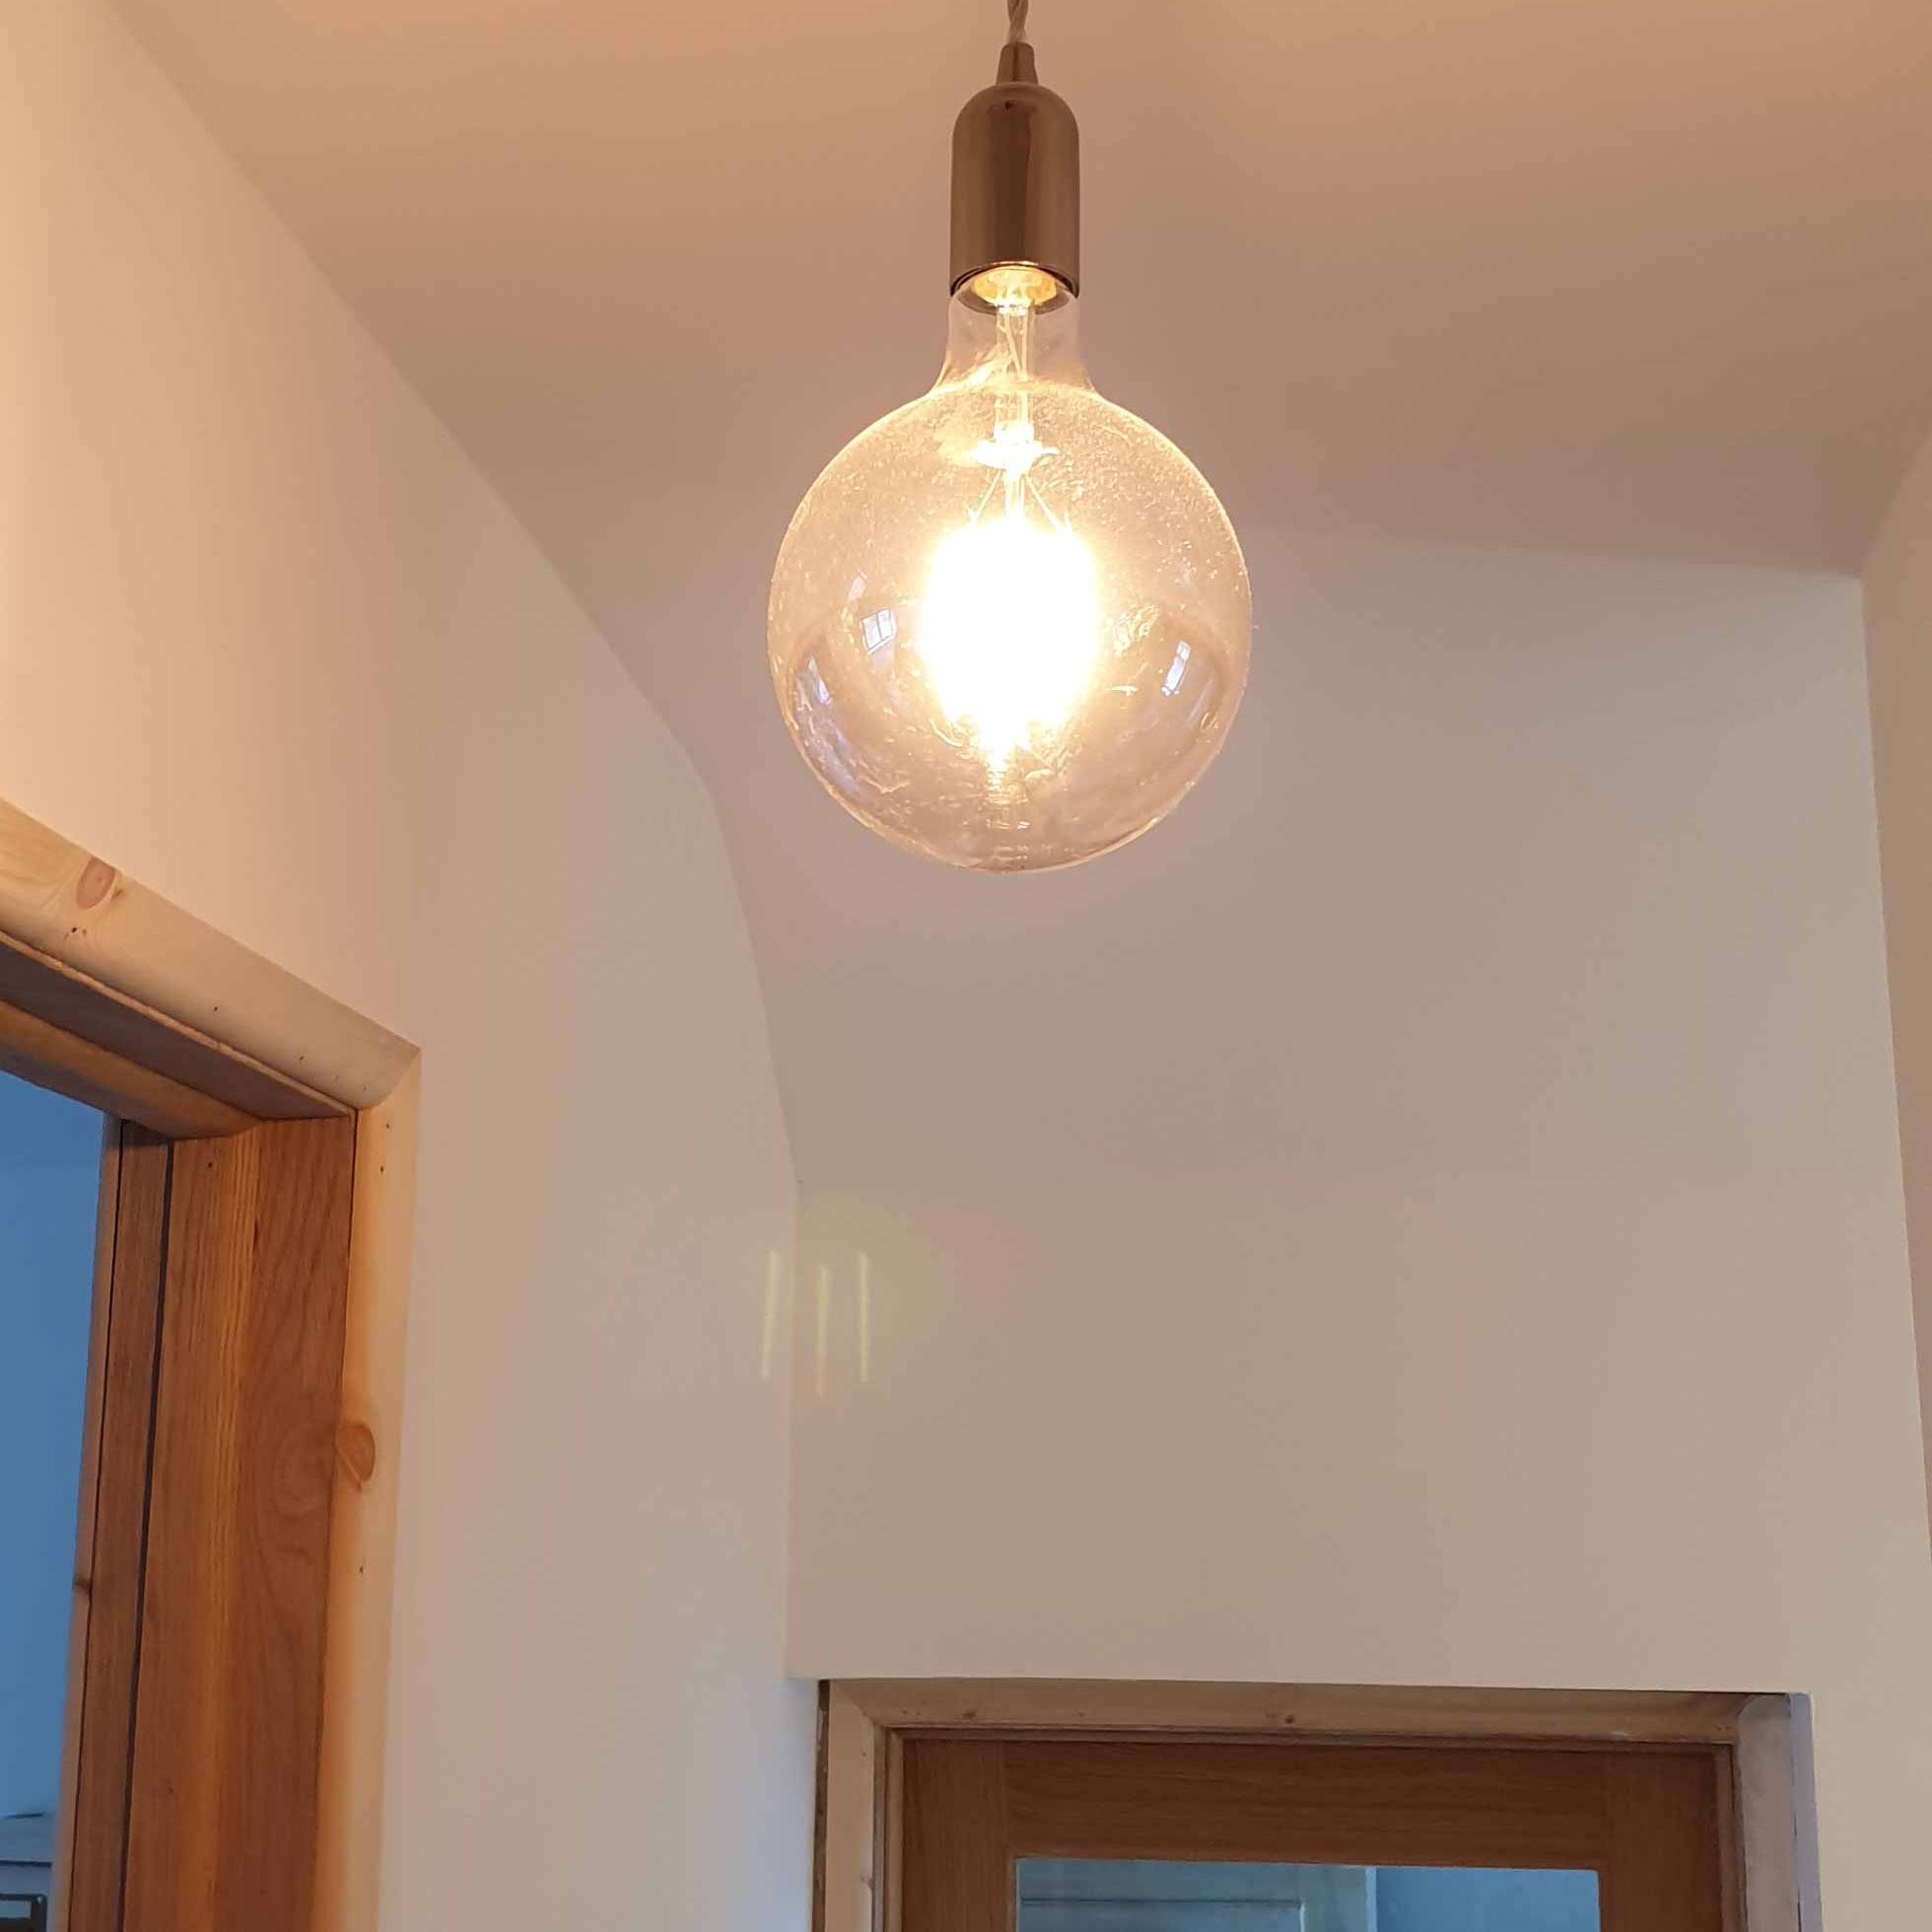 Cleverspark Electrical Installers and Electrians based in Bristol, Bath and the South West of England - An example of interior light fixtures/fittings